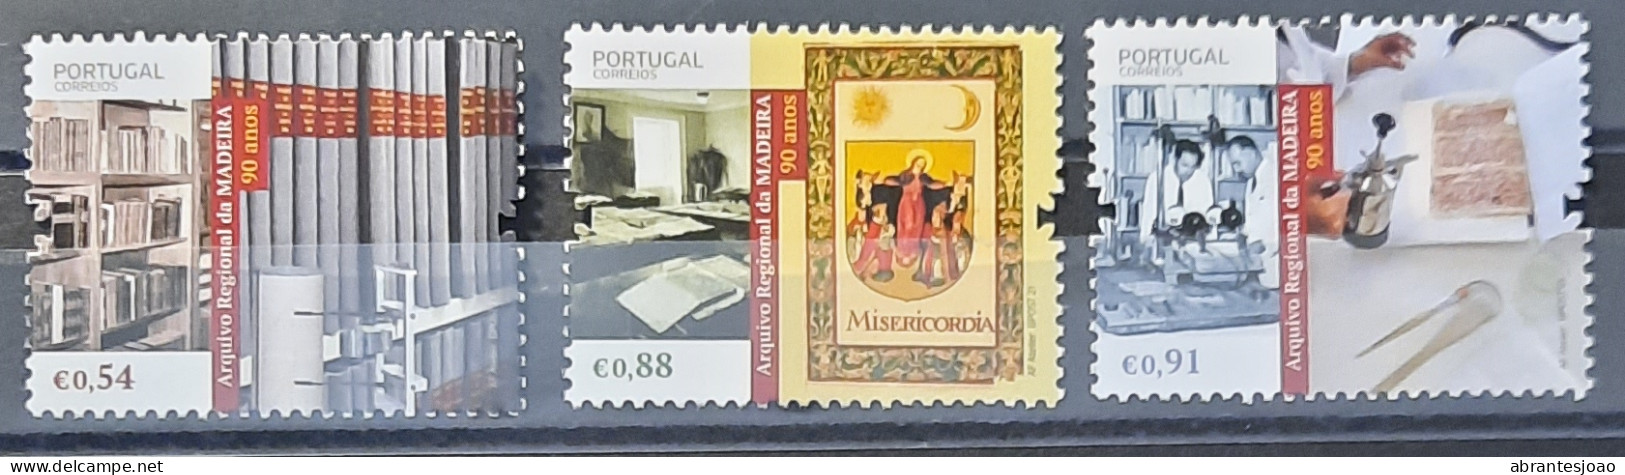 2021 - Portugal - MNH - 90 Years Of Regional Archives Of Madeira - 3 Stamps - Unused Stamps